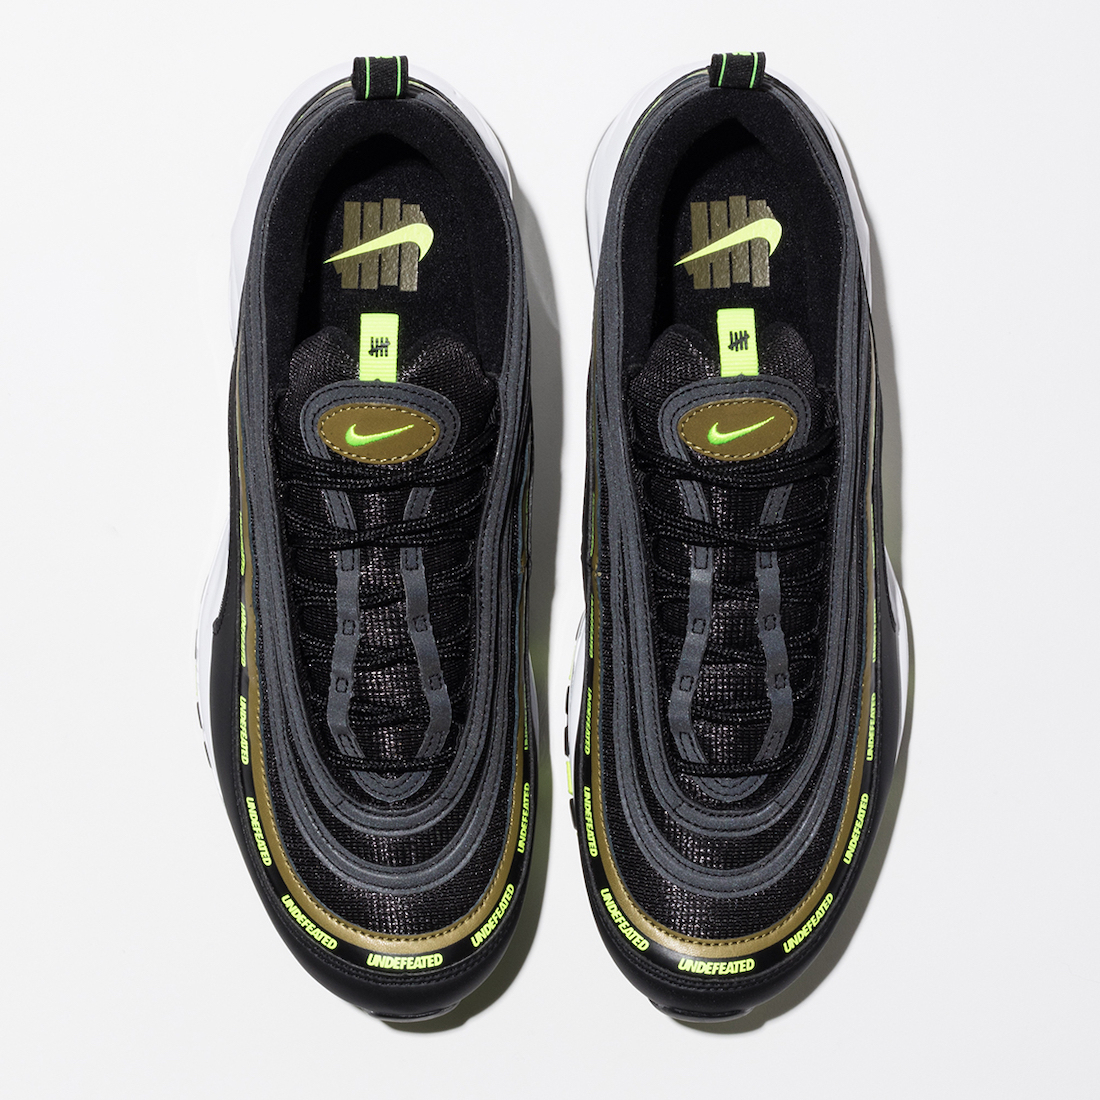 Undefeated Nike Air Max 97 2020 Release Date